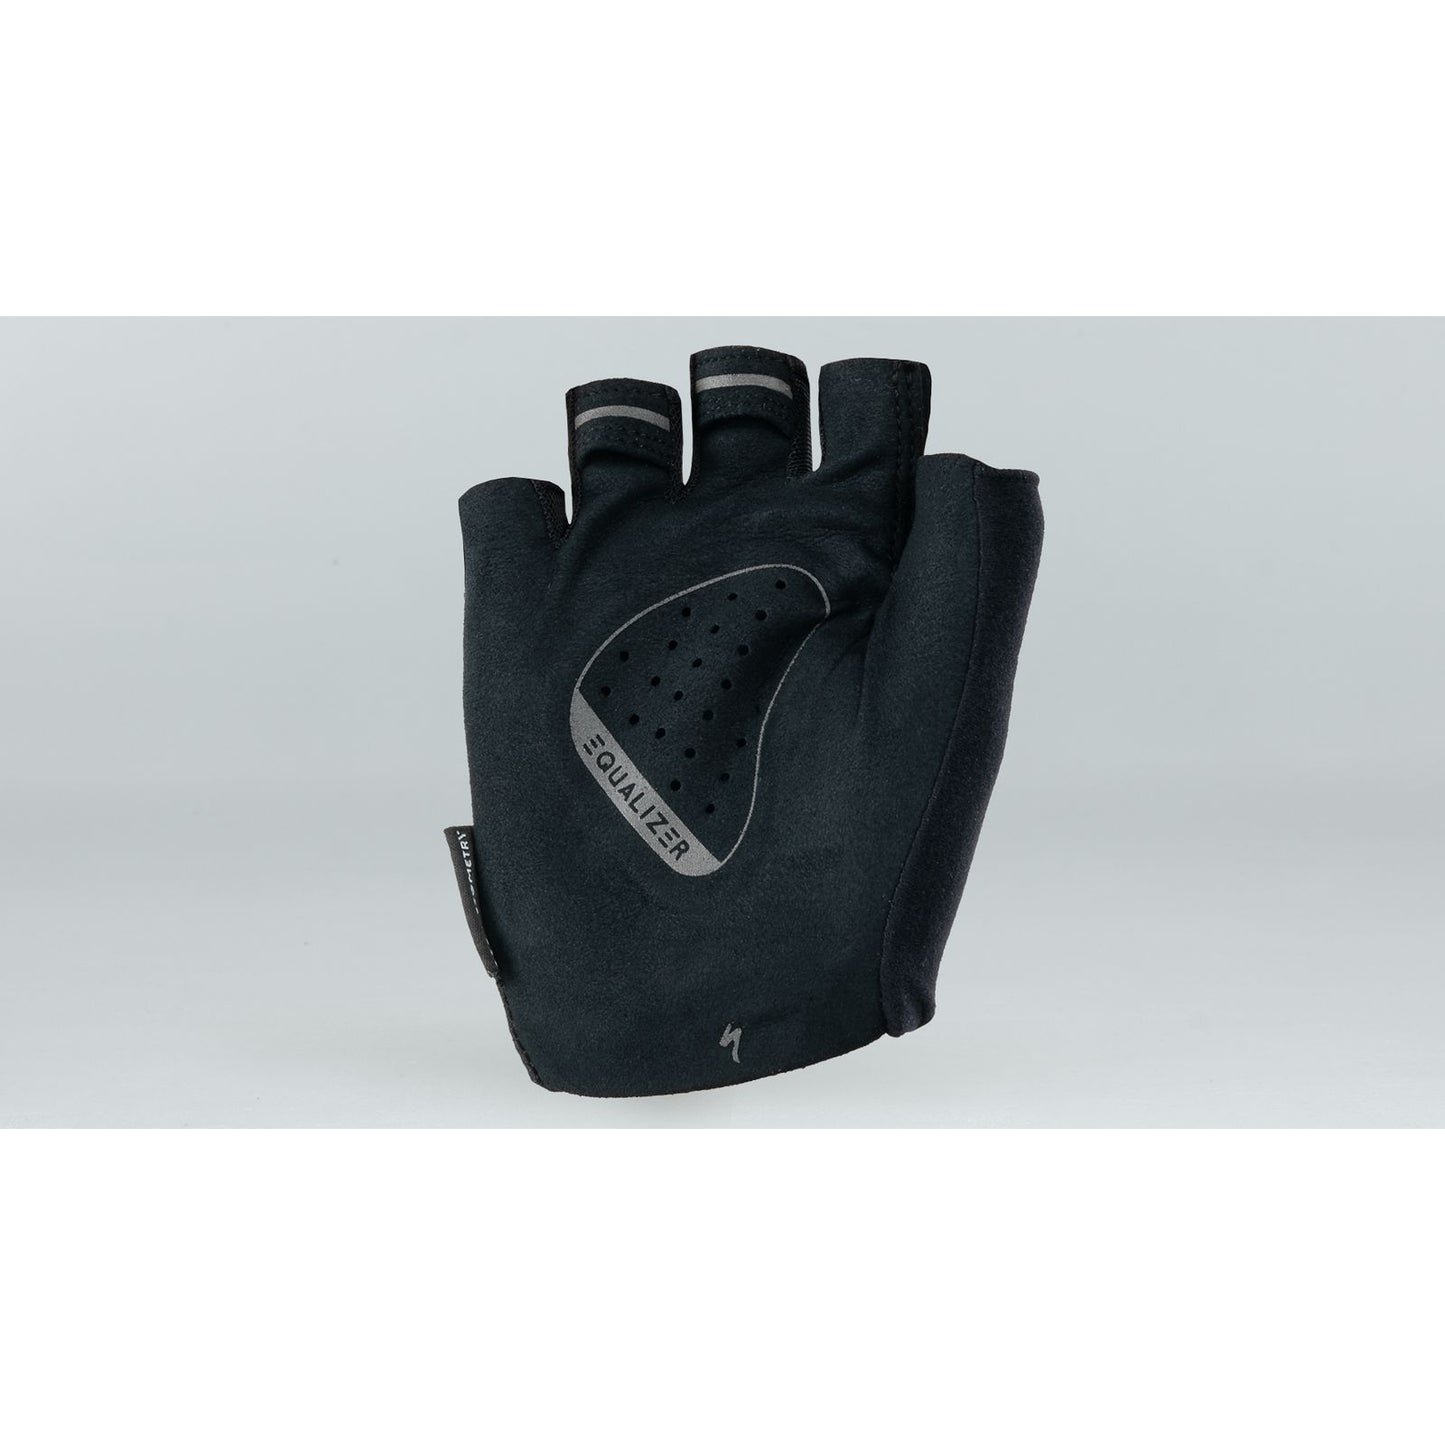 Specialized Men's Body Geometry Grail Short Finger Gloves - Gloves - Bicycle Warehouse